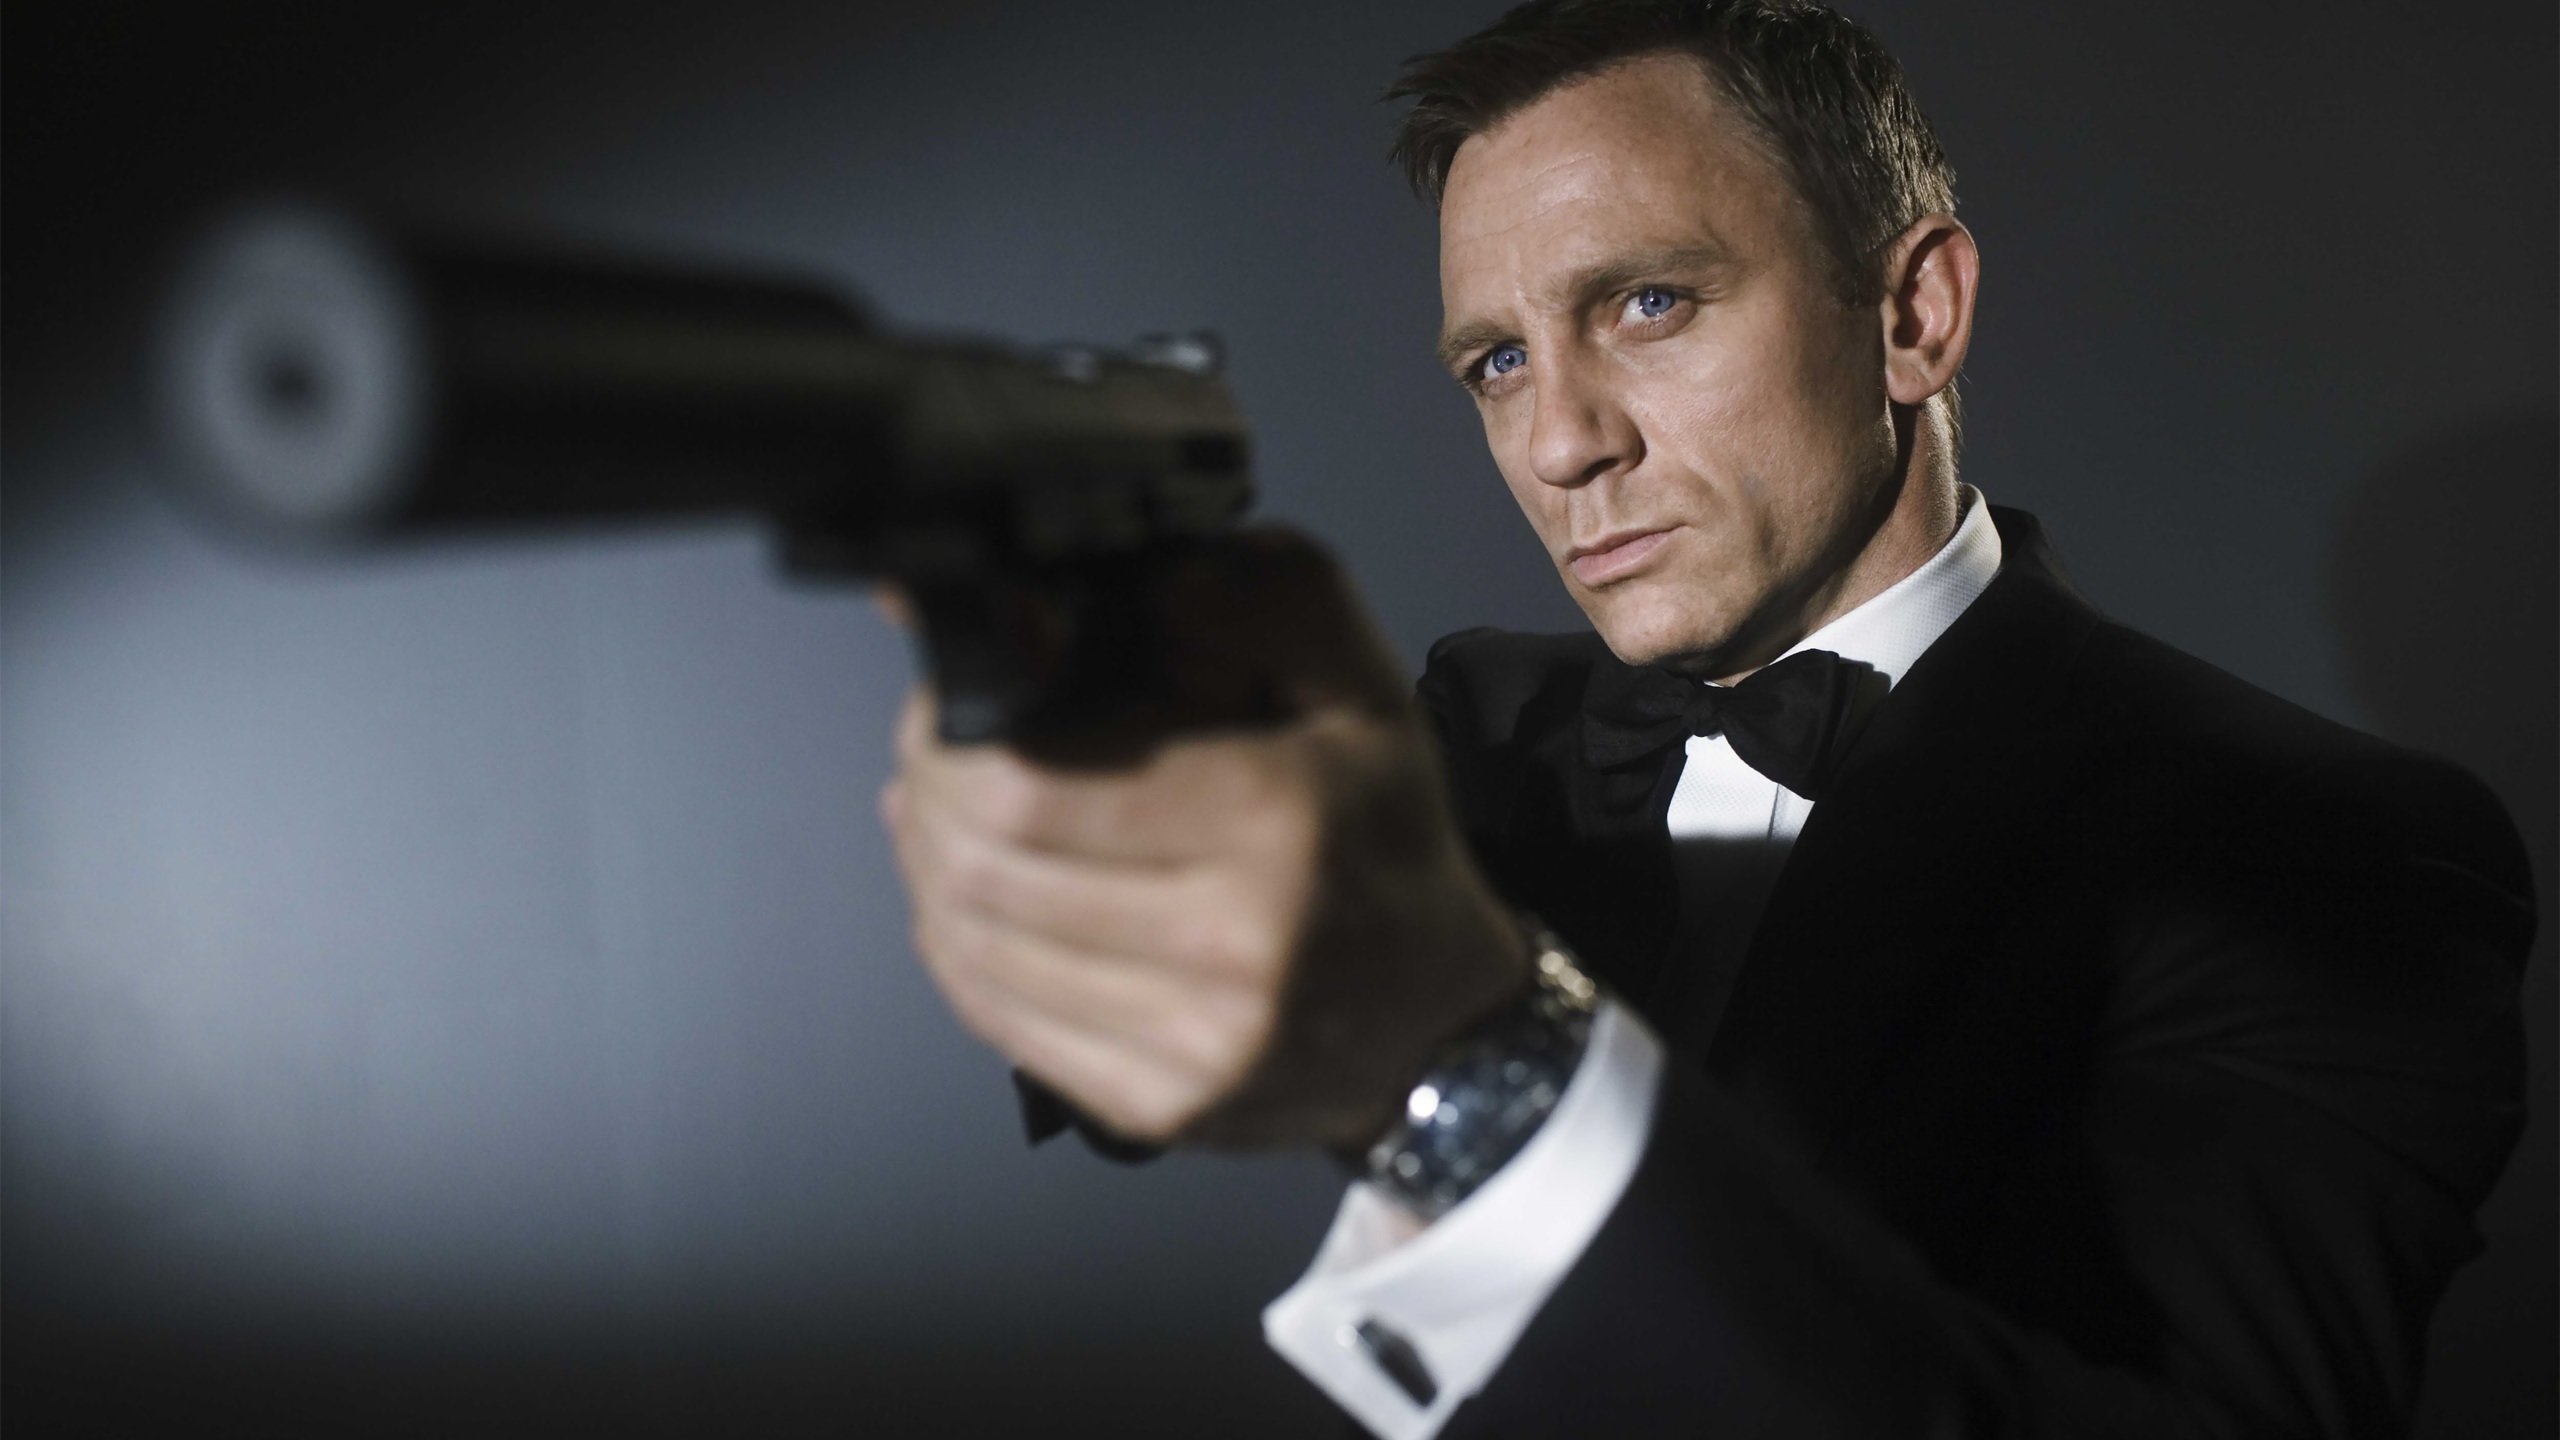 Awesome Casino Royale free wallpaper ID:134568 for hd 2560x1440 desktop